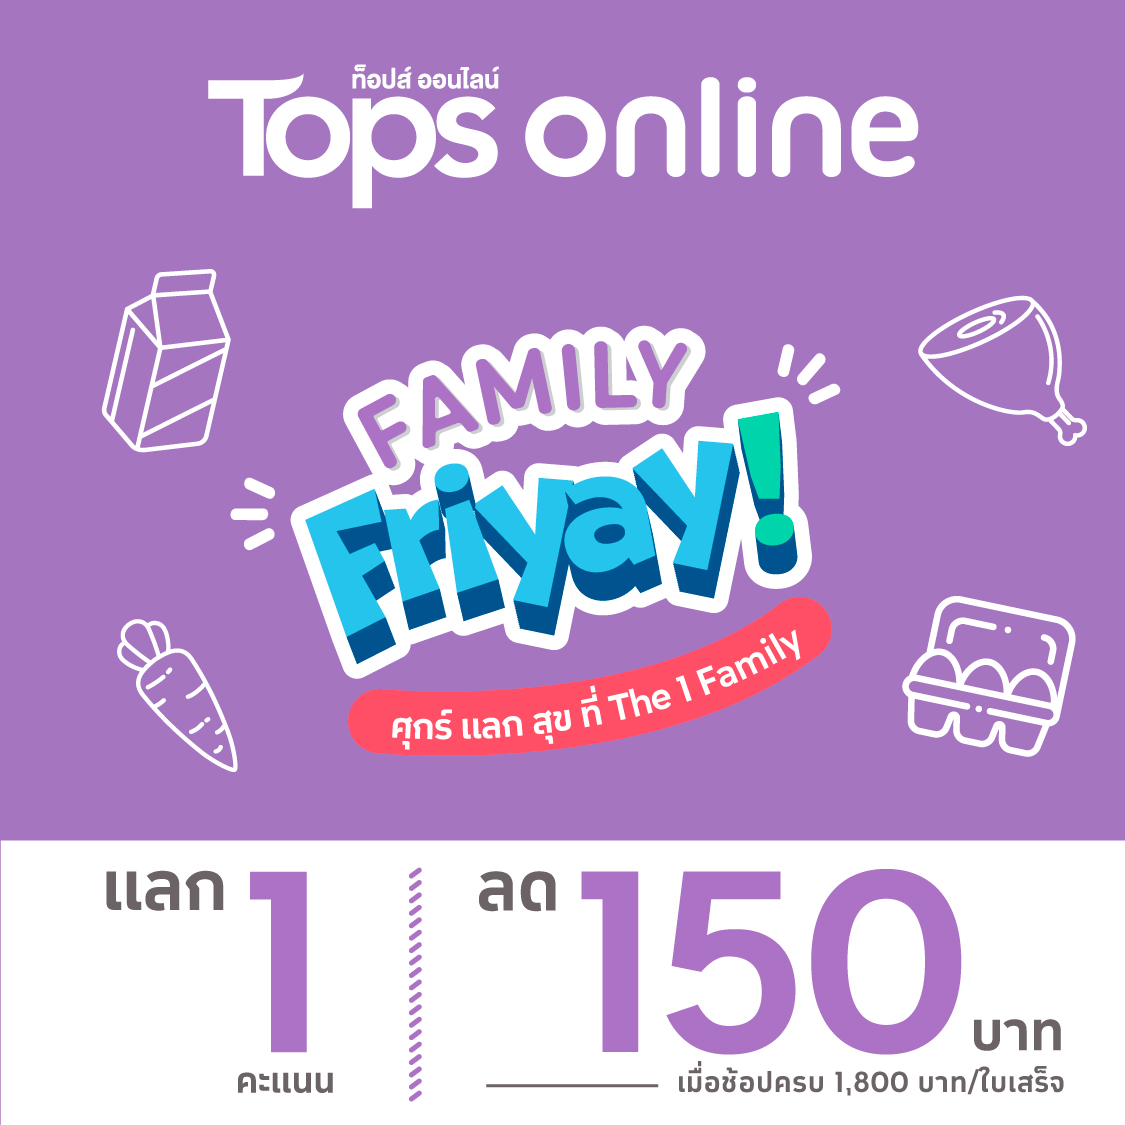 The 1 Tops Online Redeem 1 Point Special offer! Get 150. off at Tops